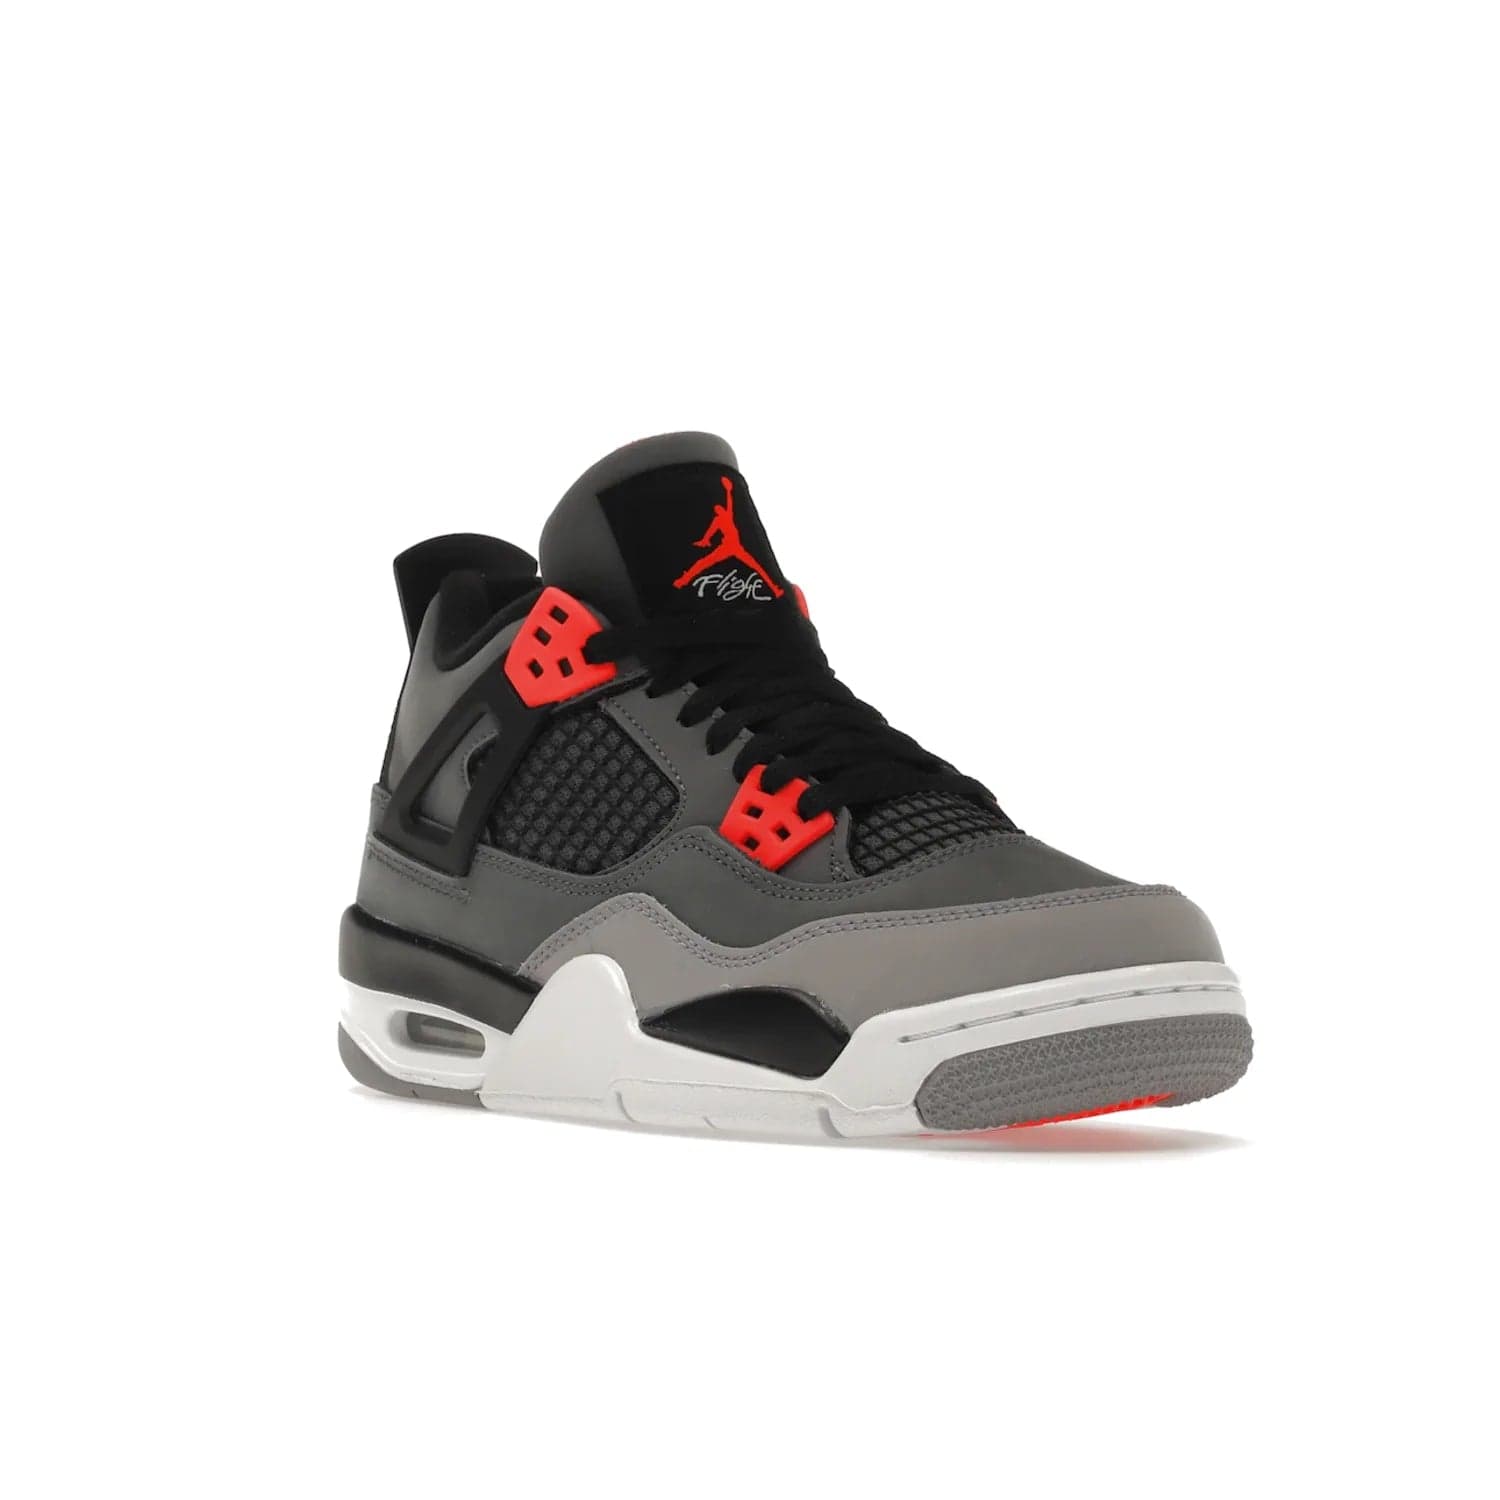 Jordan 4 Retro Infrared (GS) - Image 6 - Only at www.BallersClubKickz.com - Shop the Air Jordan 4 Retro Infrared (GS) for a classic silhouette with subtle yet bold features. Dark grey nubuck upper with lighter forefoot overlay, black accents, Infrared molded eyelets & woven tongue tag. Available June 2022.